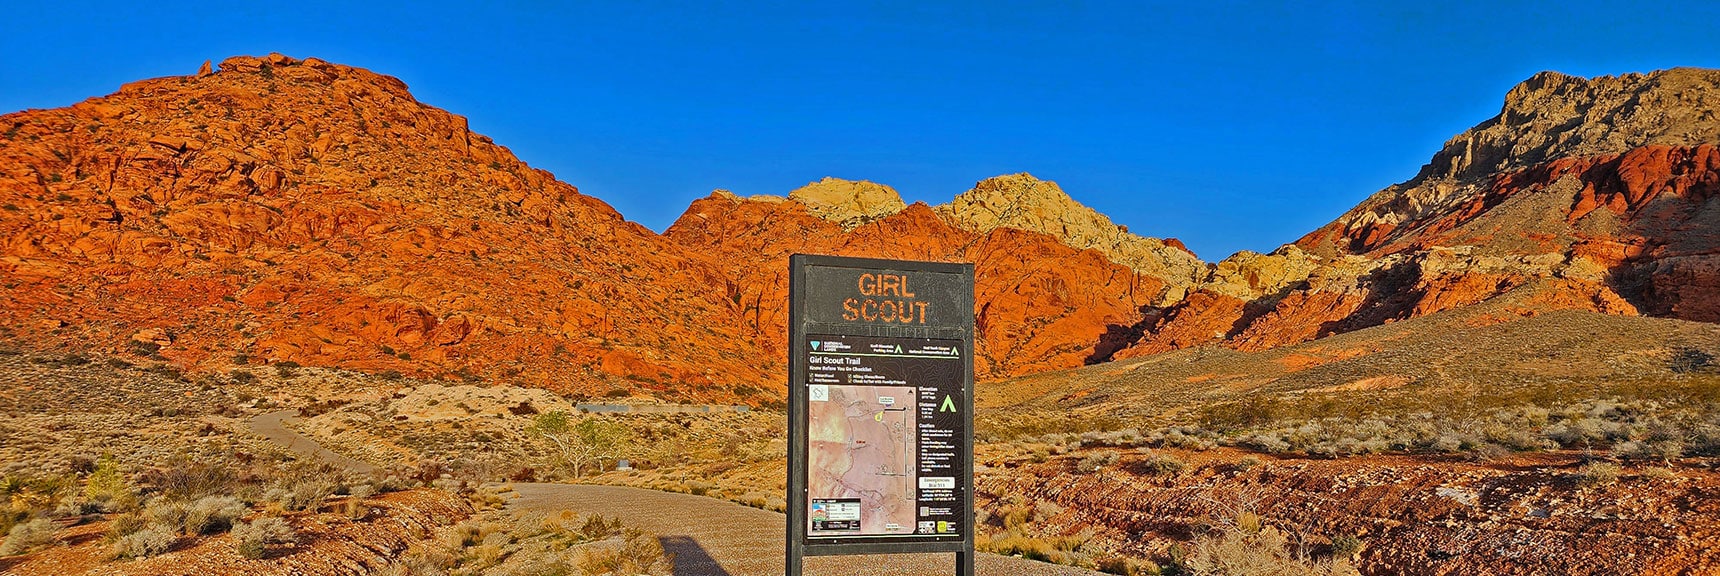 Girl Scout Trailhead to Ash Spring. | Ash Canyon to Calico Tanks | Calico Basin and Red Rock Canyon, Nevada | David Smith | Las Vegas Area Trails